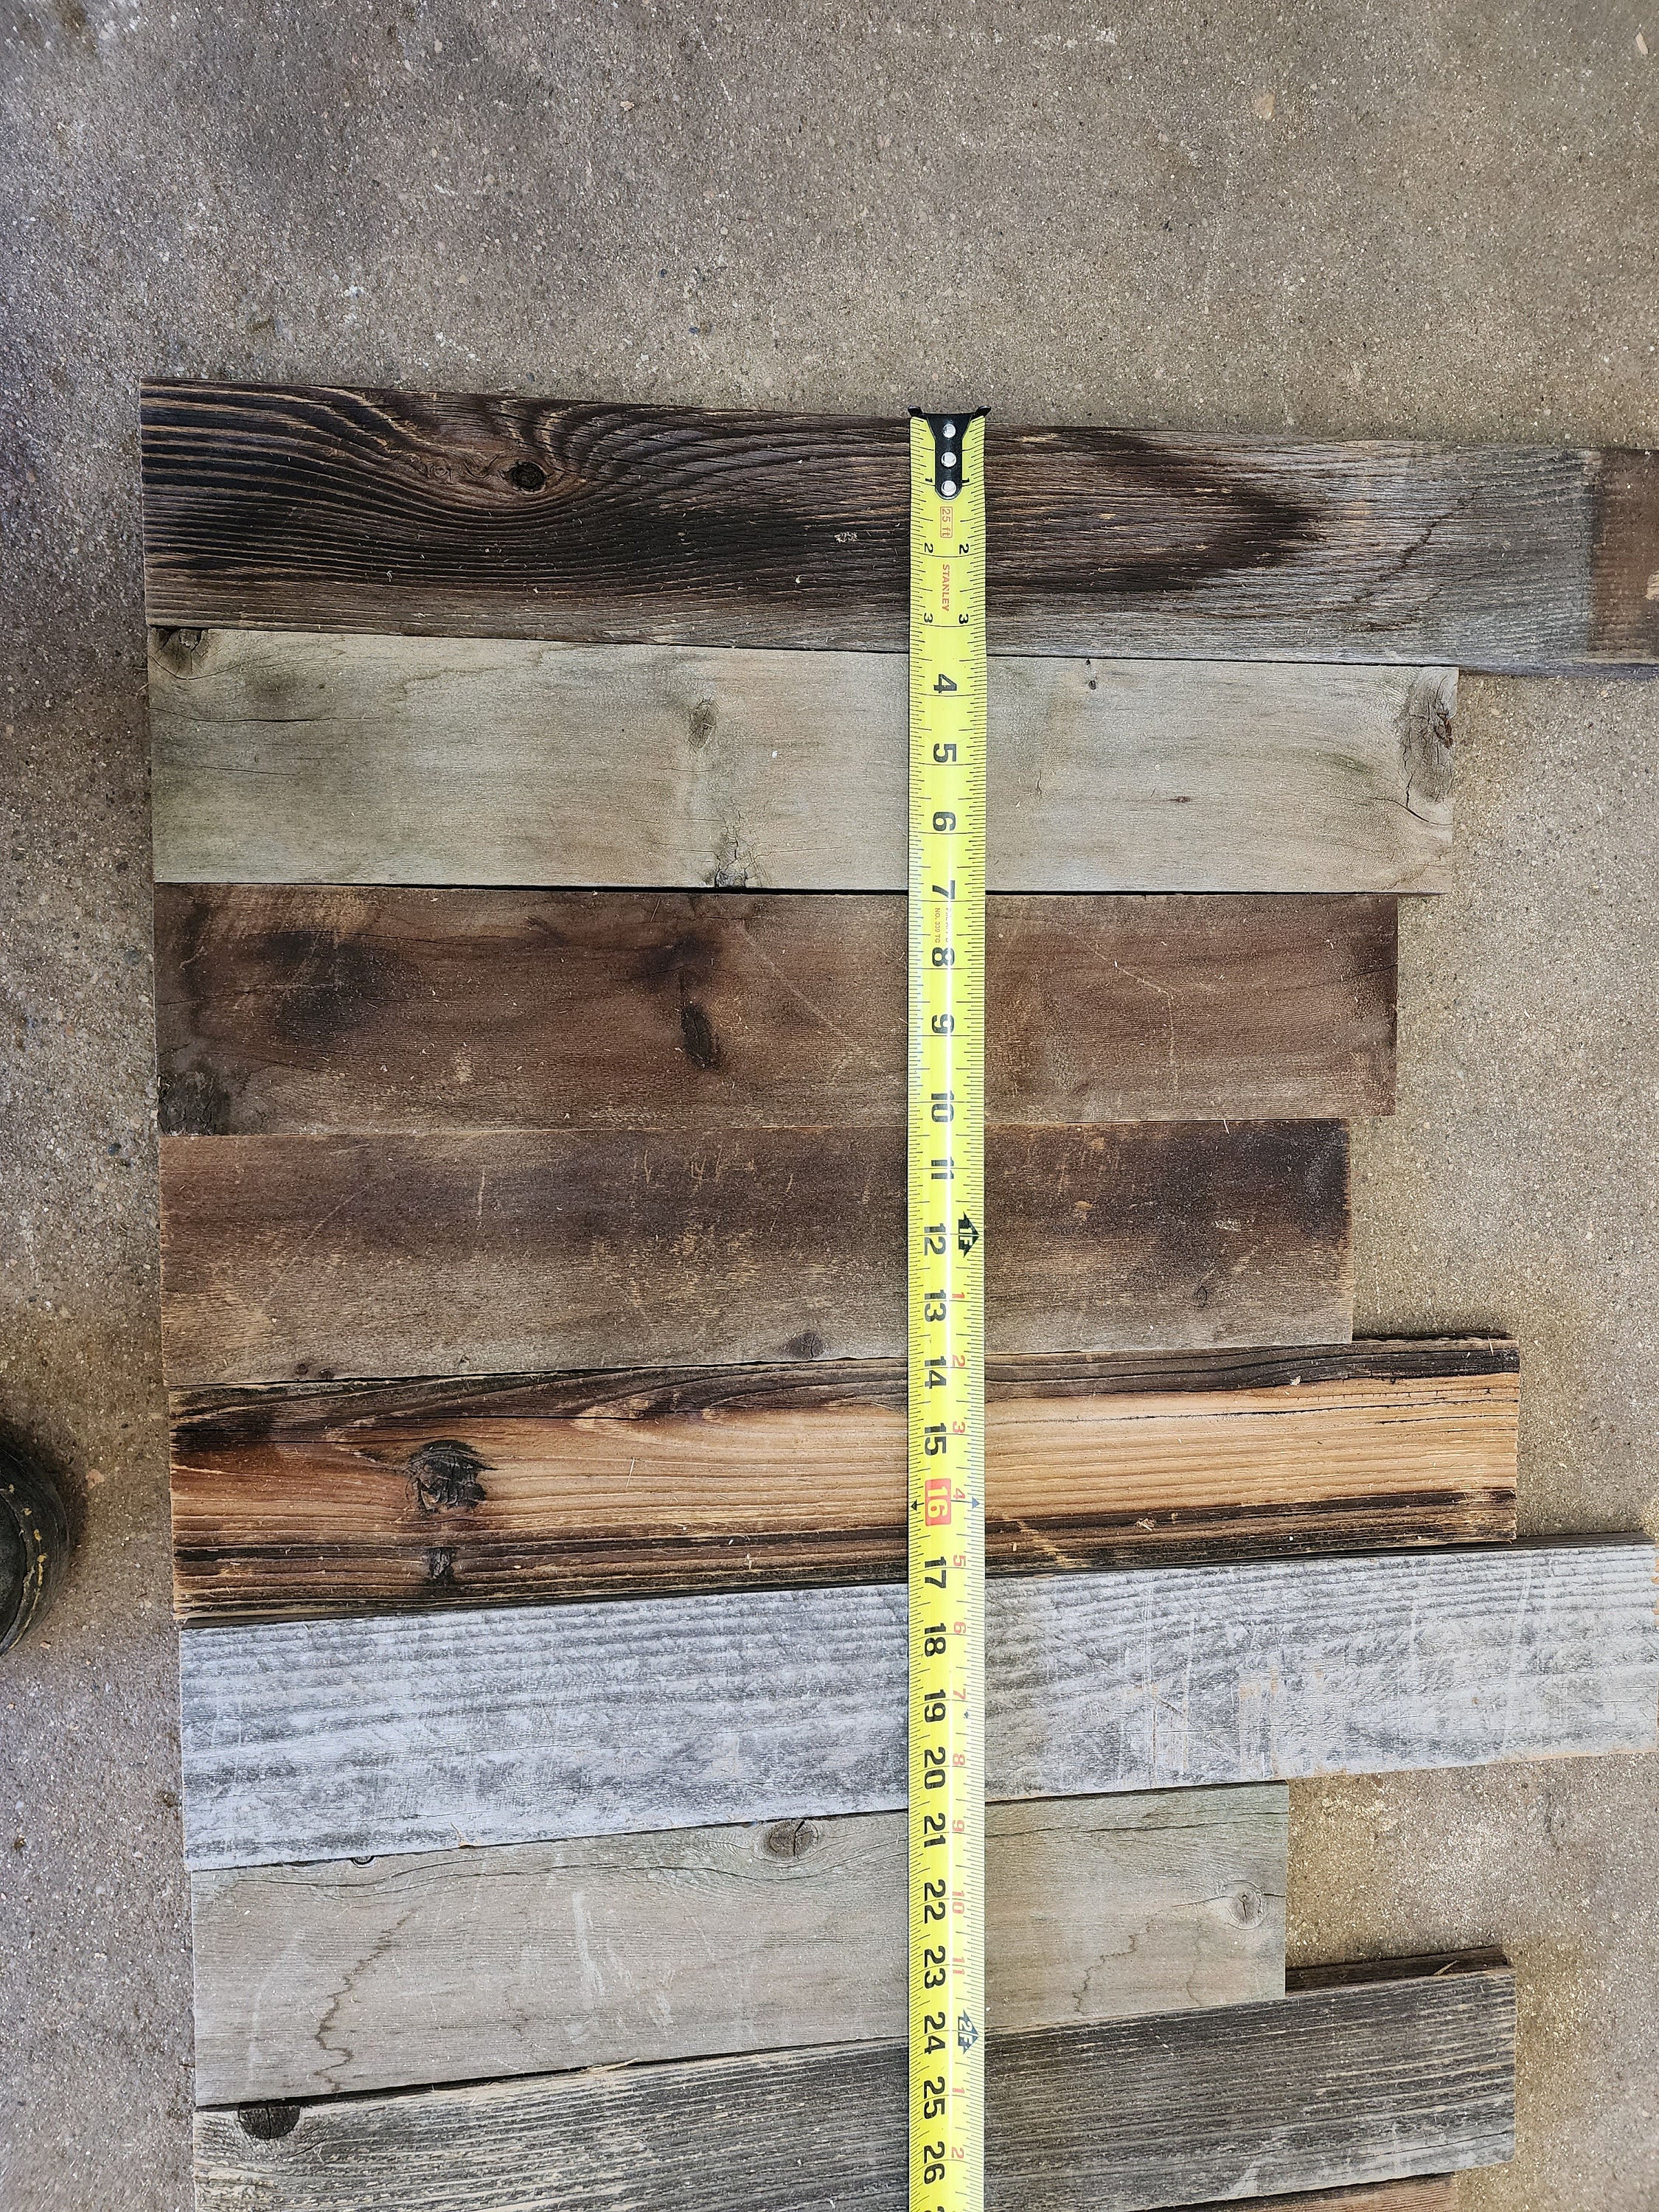 Discount Bulk Reclaimed Wood Planks. Assorted Sizes & Colors. 1222